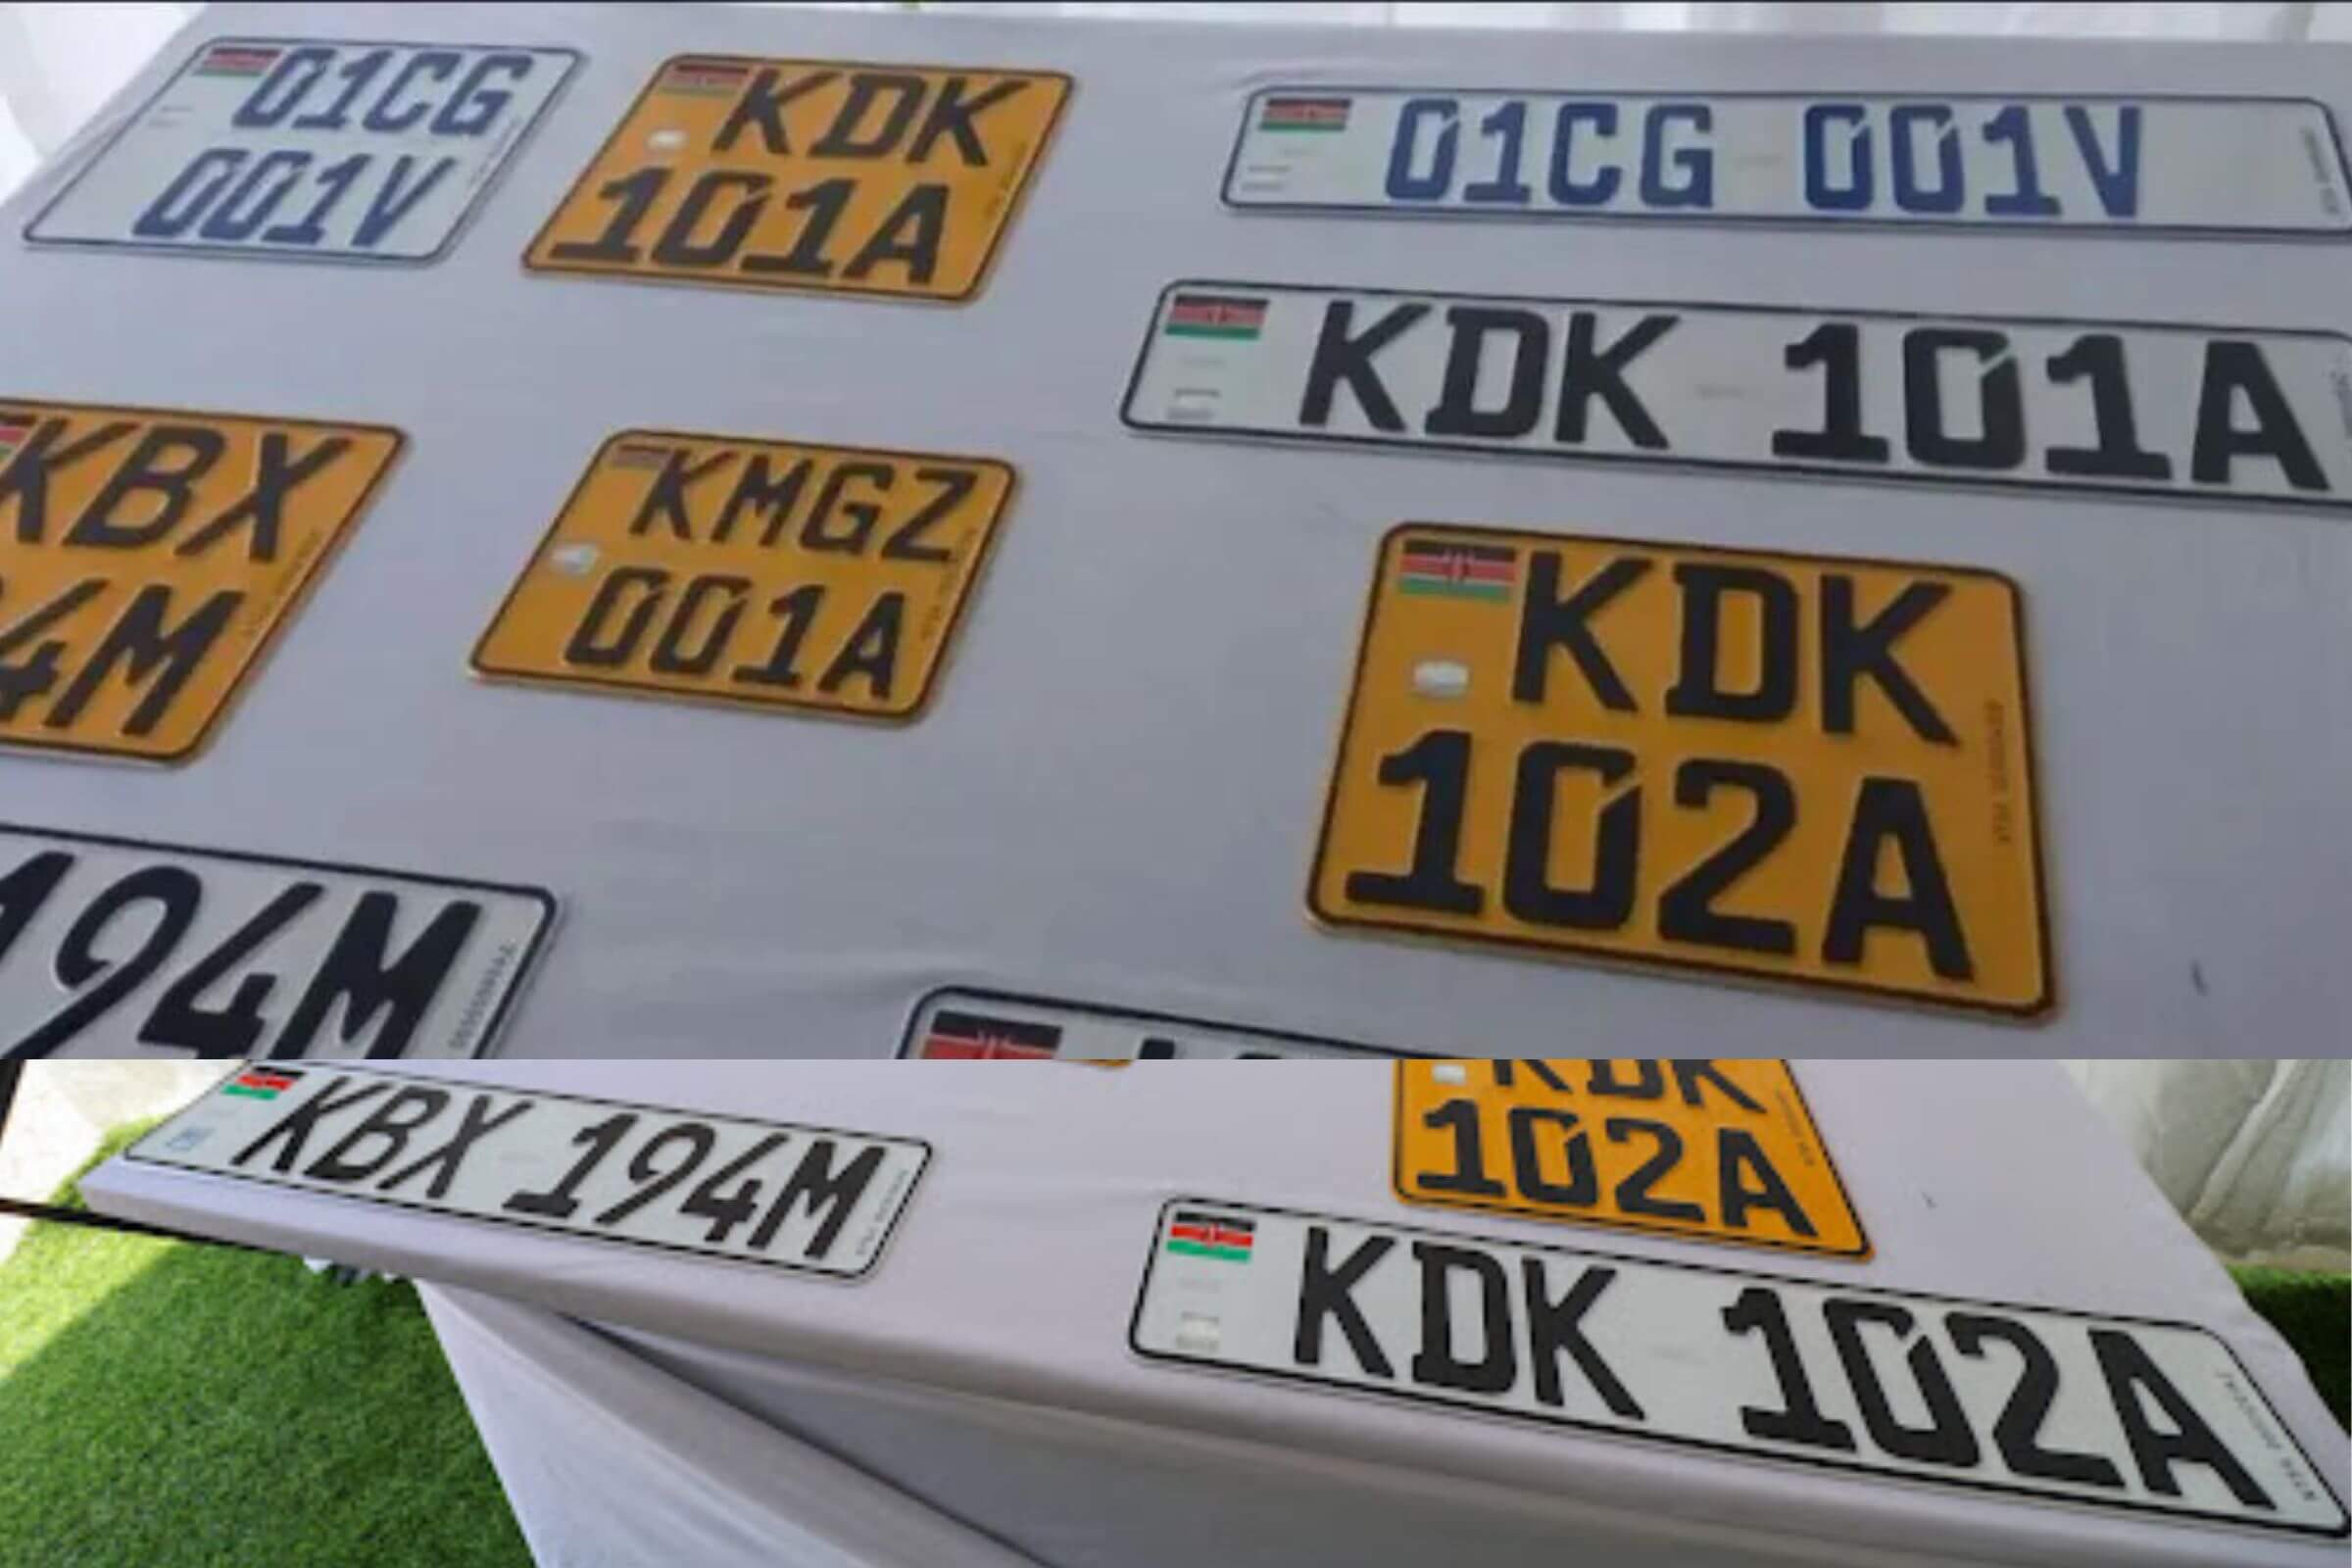 How to apply for new Kenya Number Plate